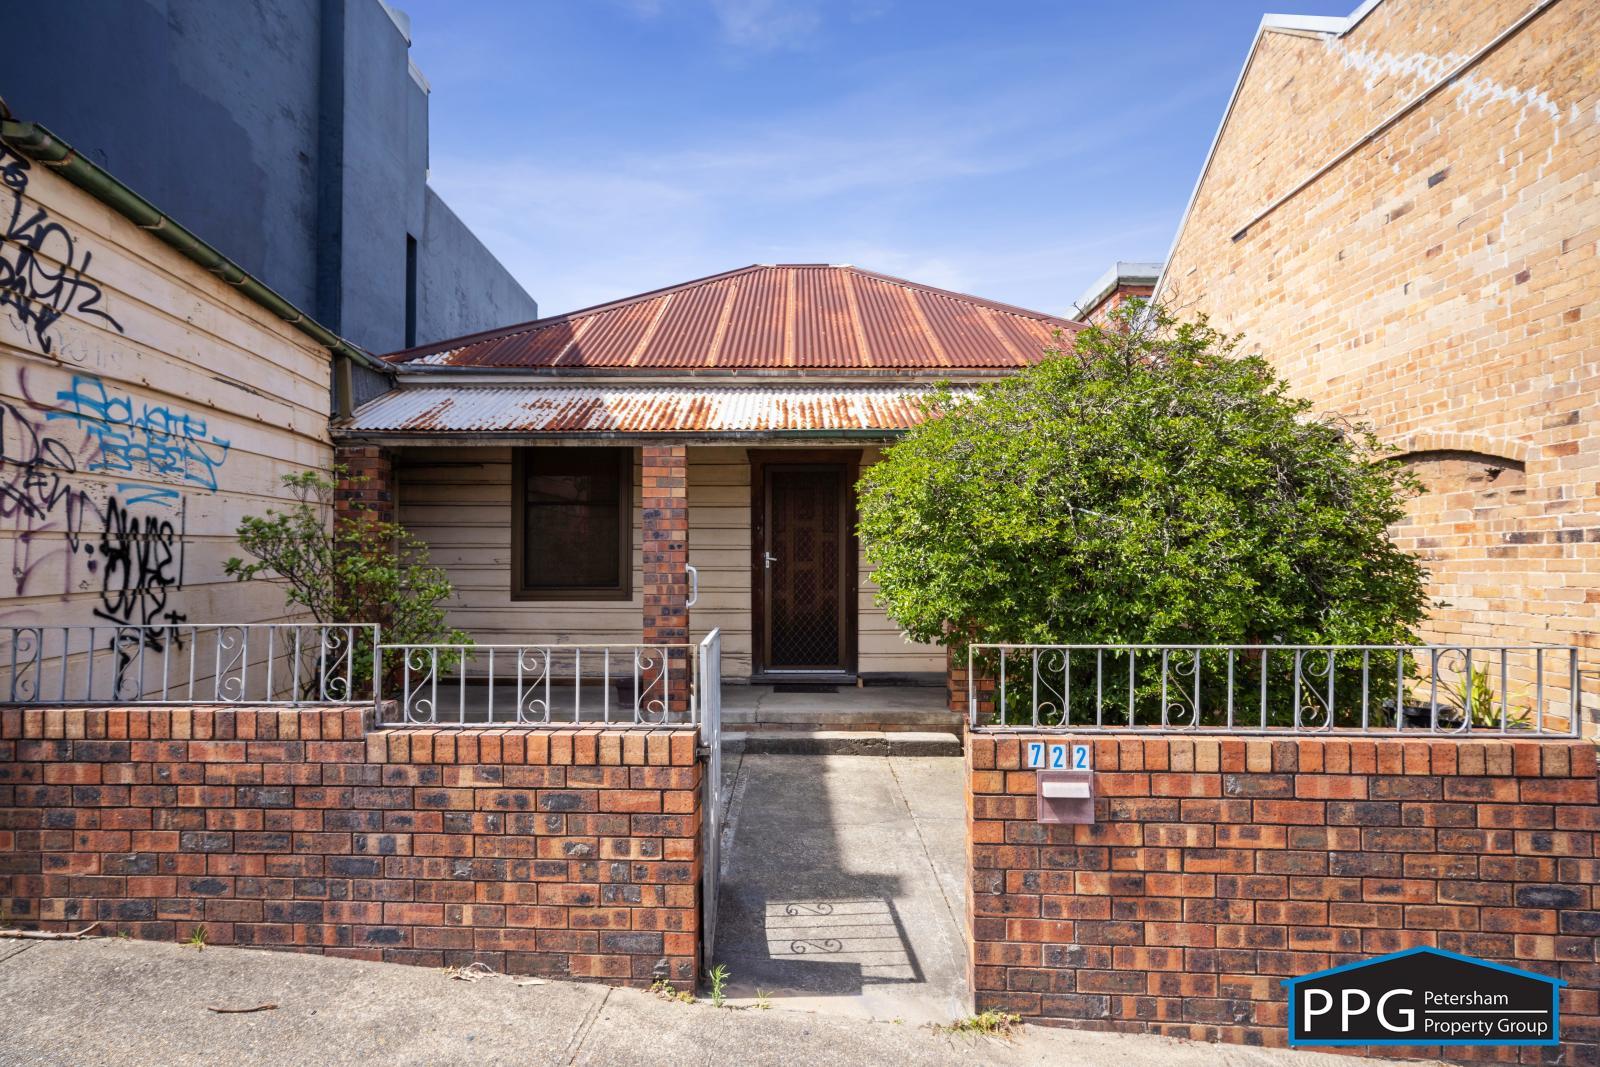 Property For Sale in Petersham